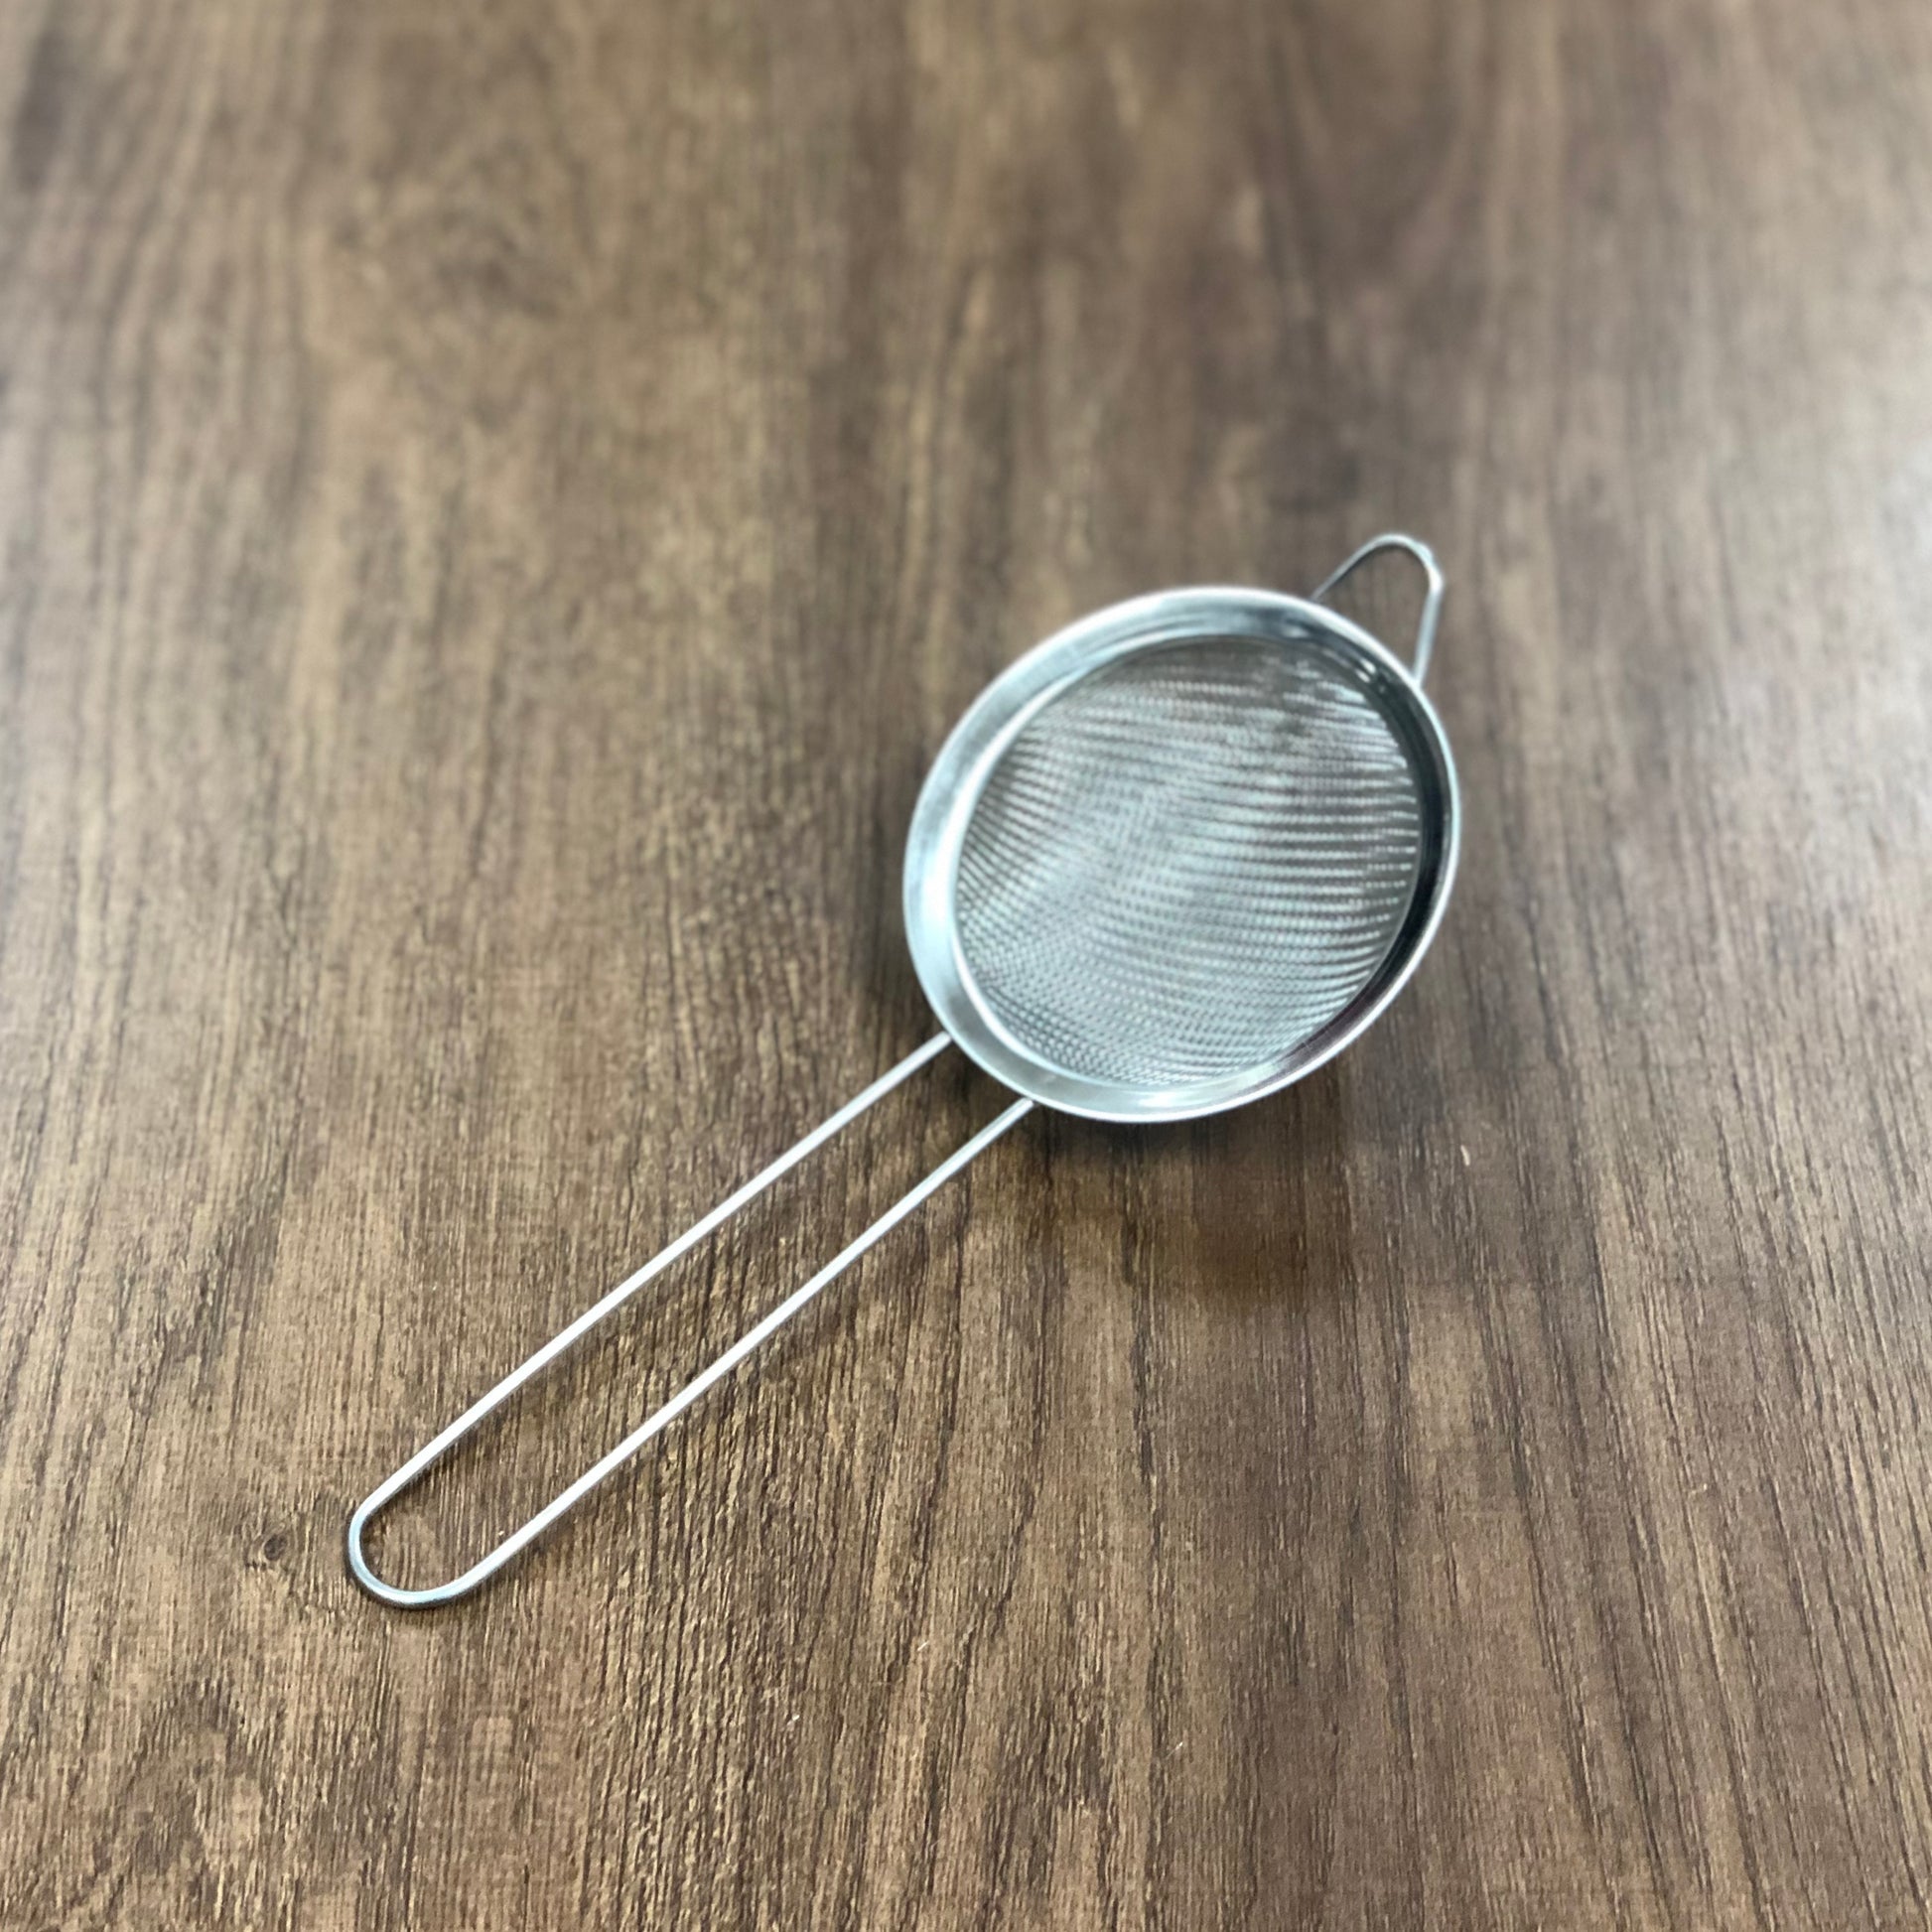 Stainless Steel Sieves 不鏽鋼篩子 - Discover Health & Lifestyle Asia